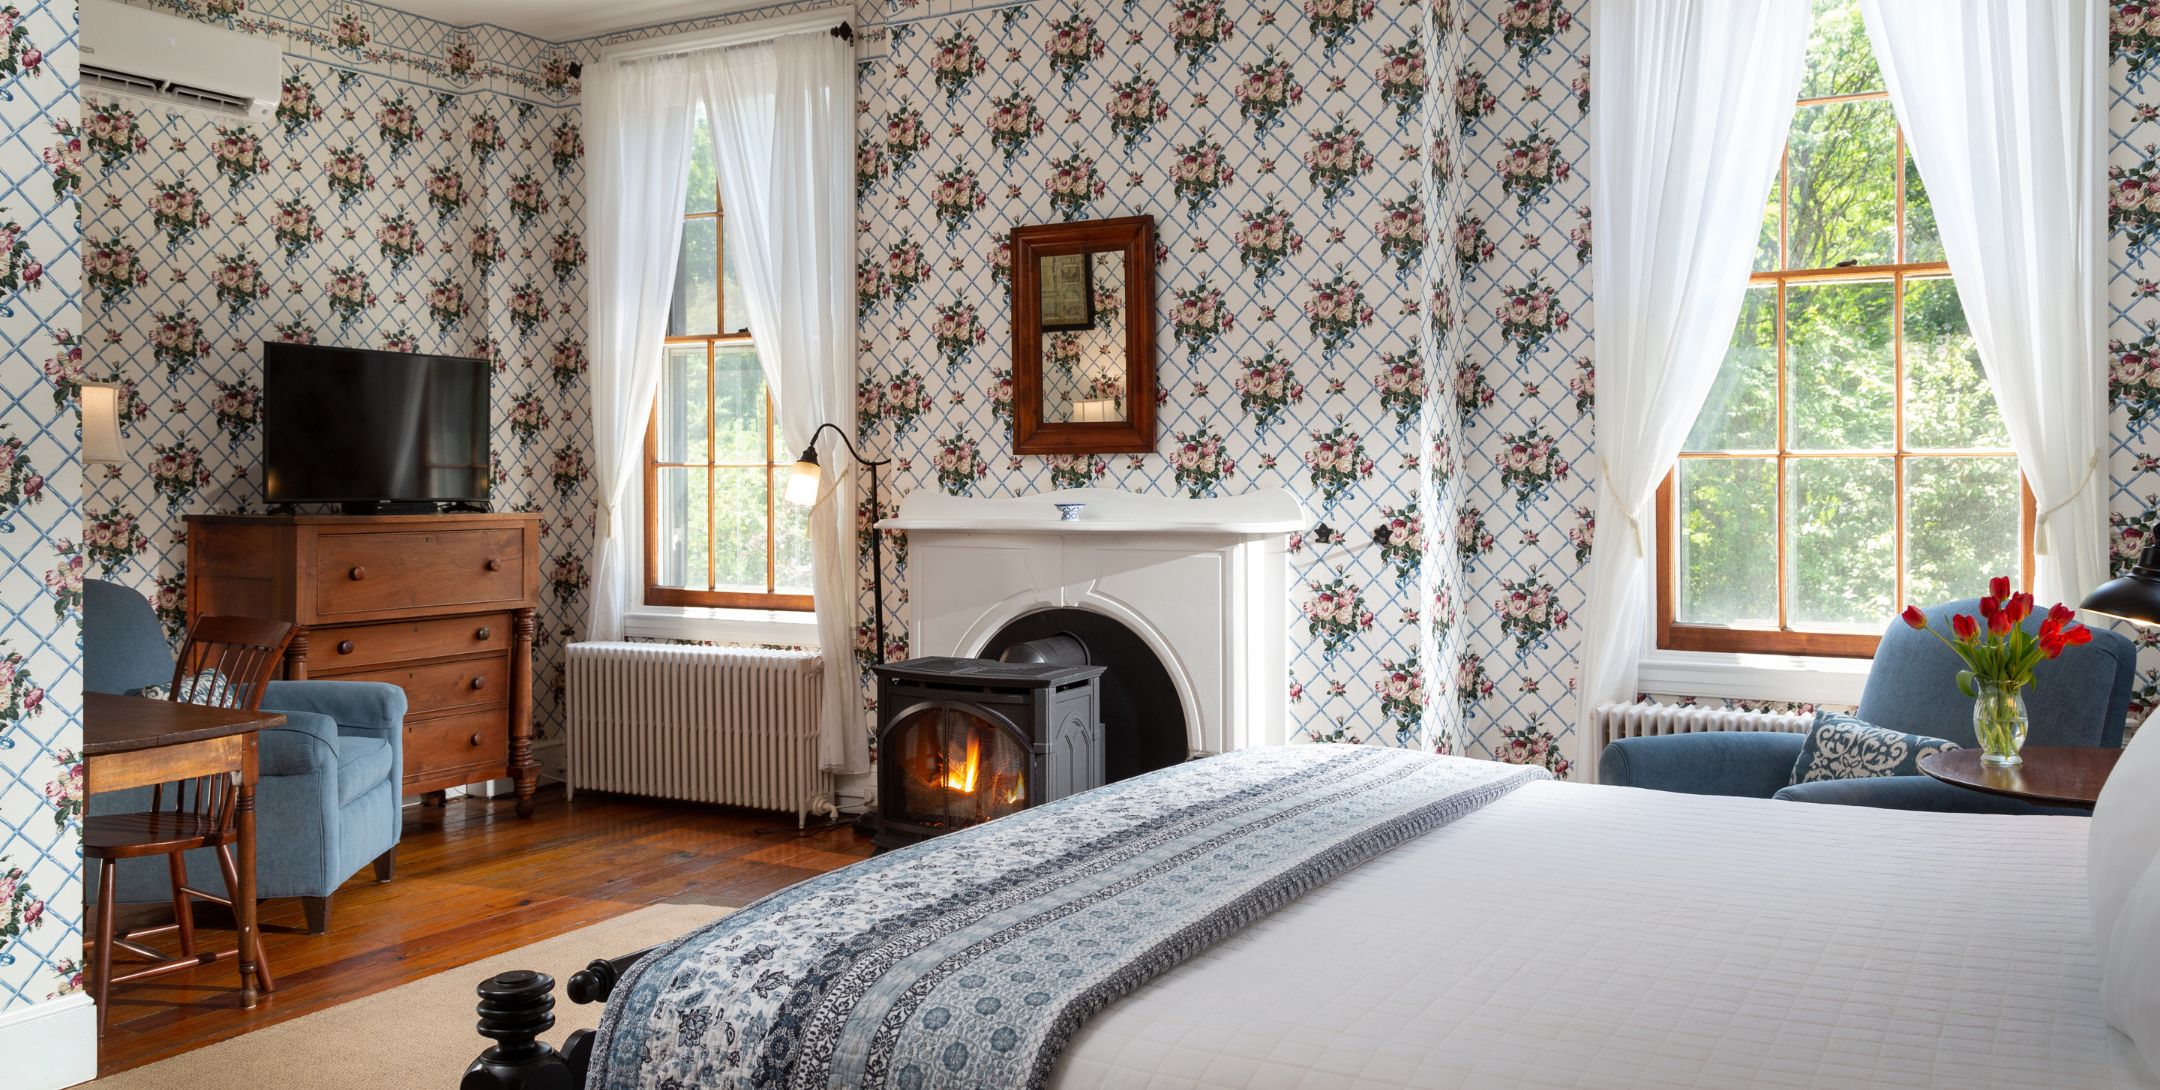 Spacious guest room with floral wallpaper, natural light, fire stove, table for two, TV and chair, and comfy bed